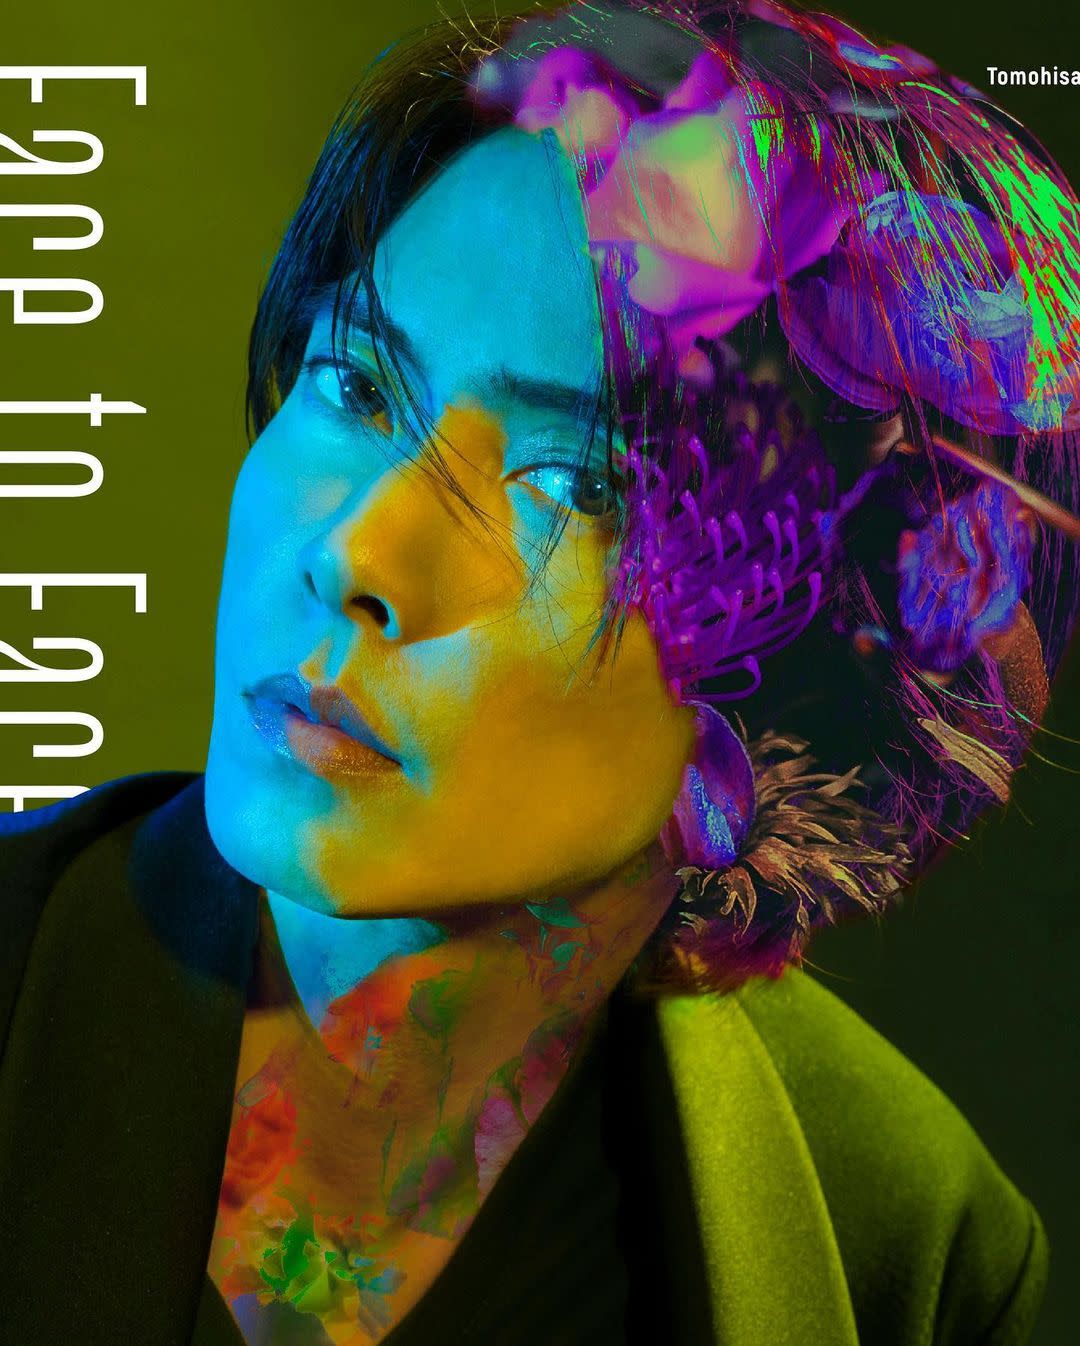 Tomohisa Yamashita will be releasing a new single Face To Face on 16 February. (Photo: Instagram/tomo.y9)